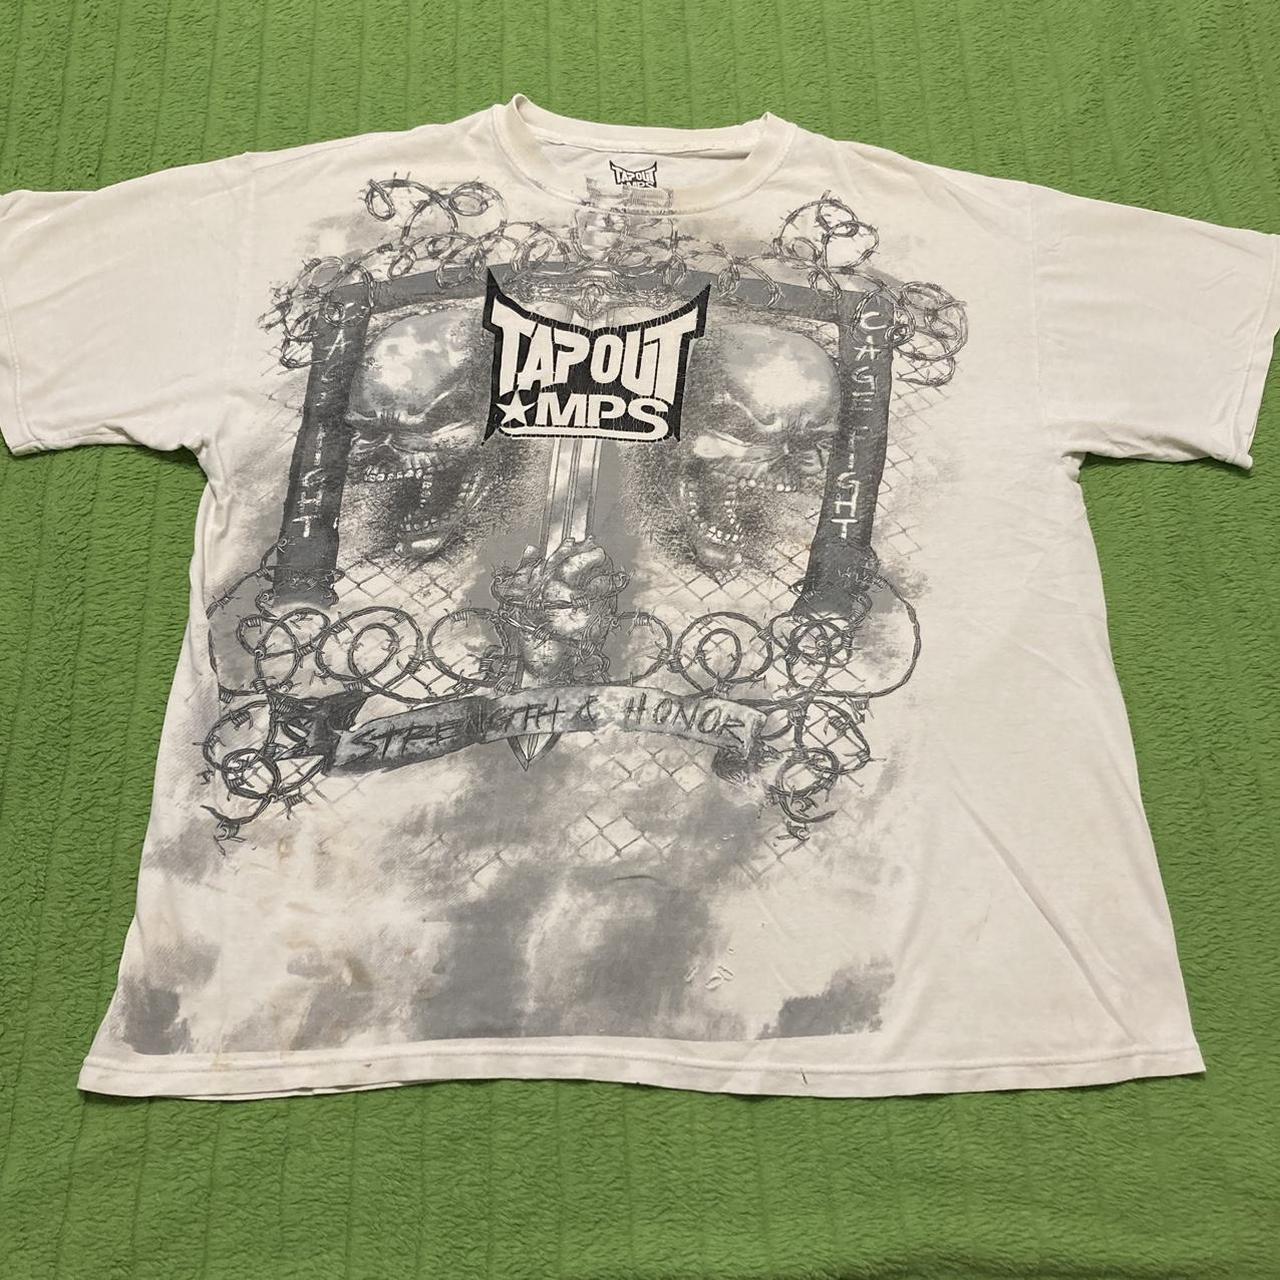 Cyber y2k grunge mall goth tee grunge tee from the - Depop